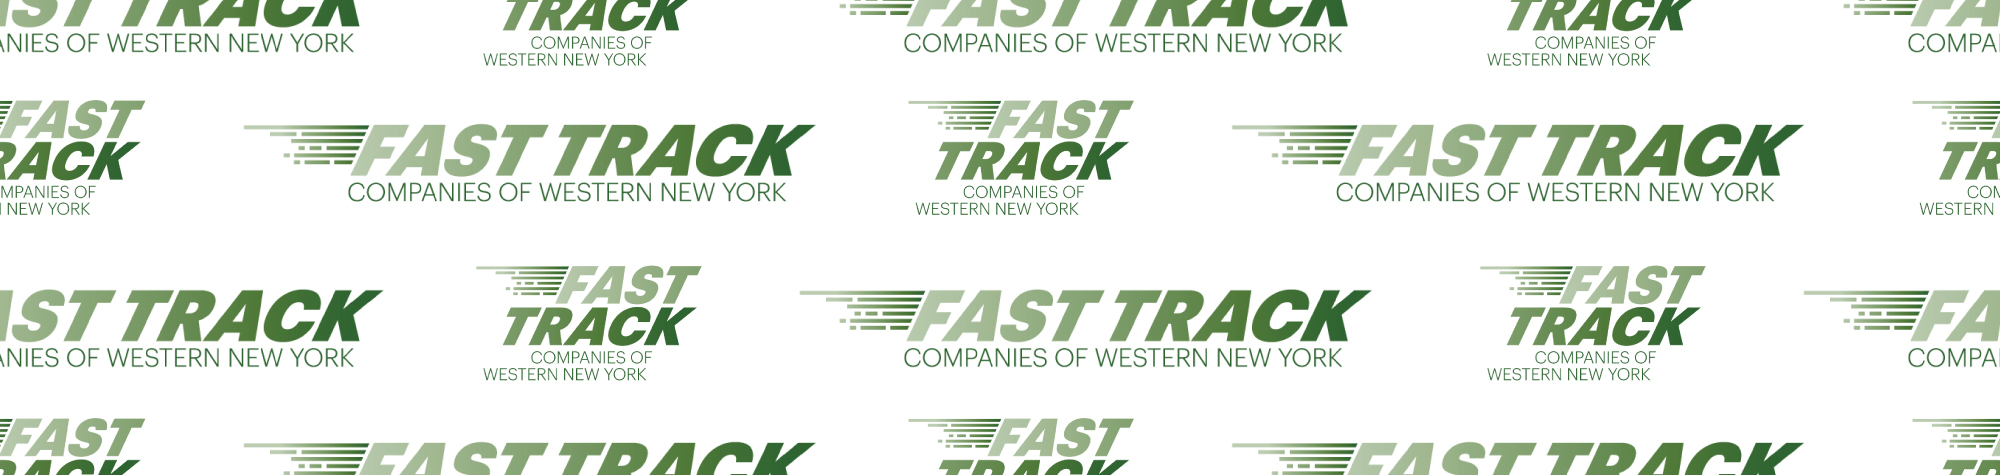 Merchants Insurance Group named “Fast Track” Company for 2021 by Buffalo’s Business First